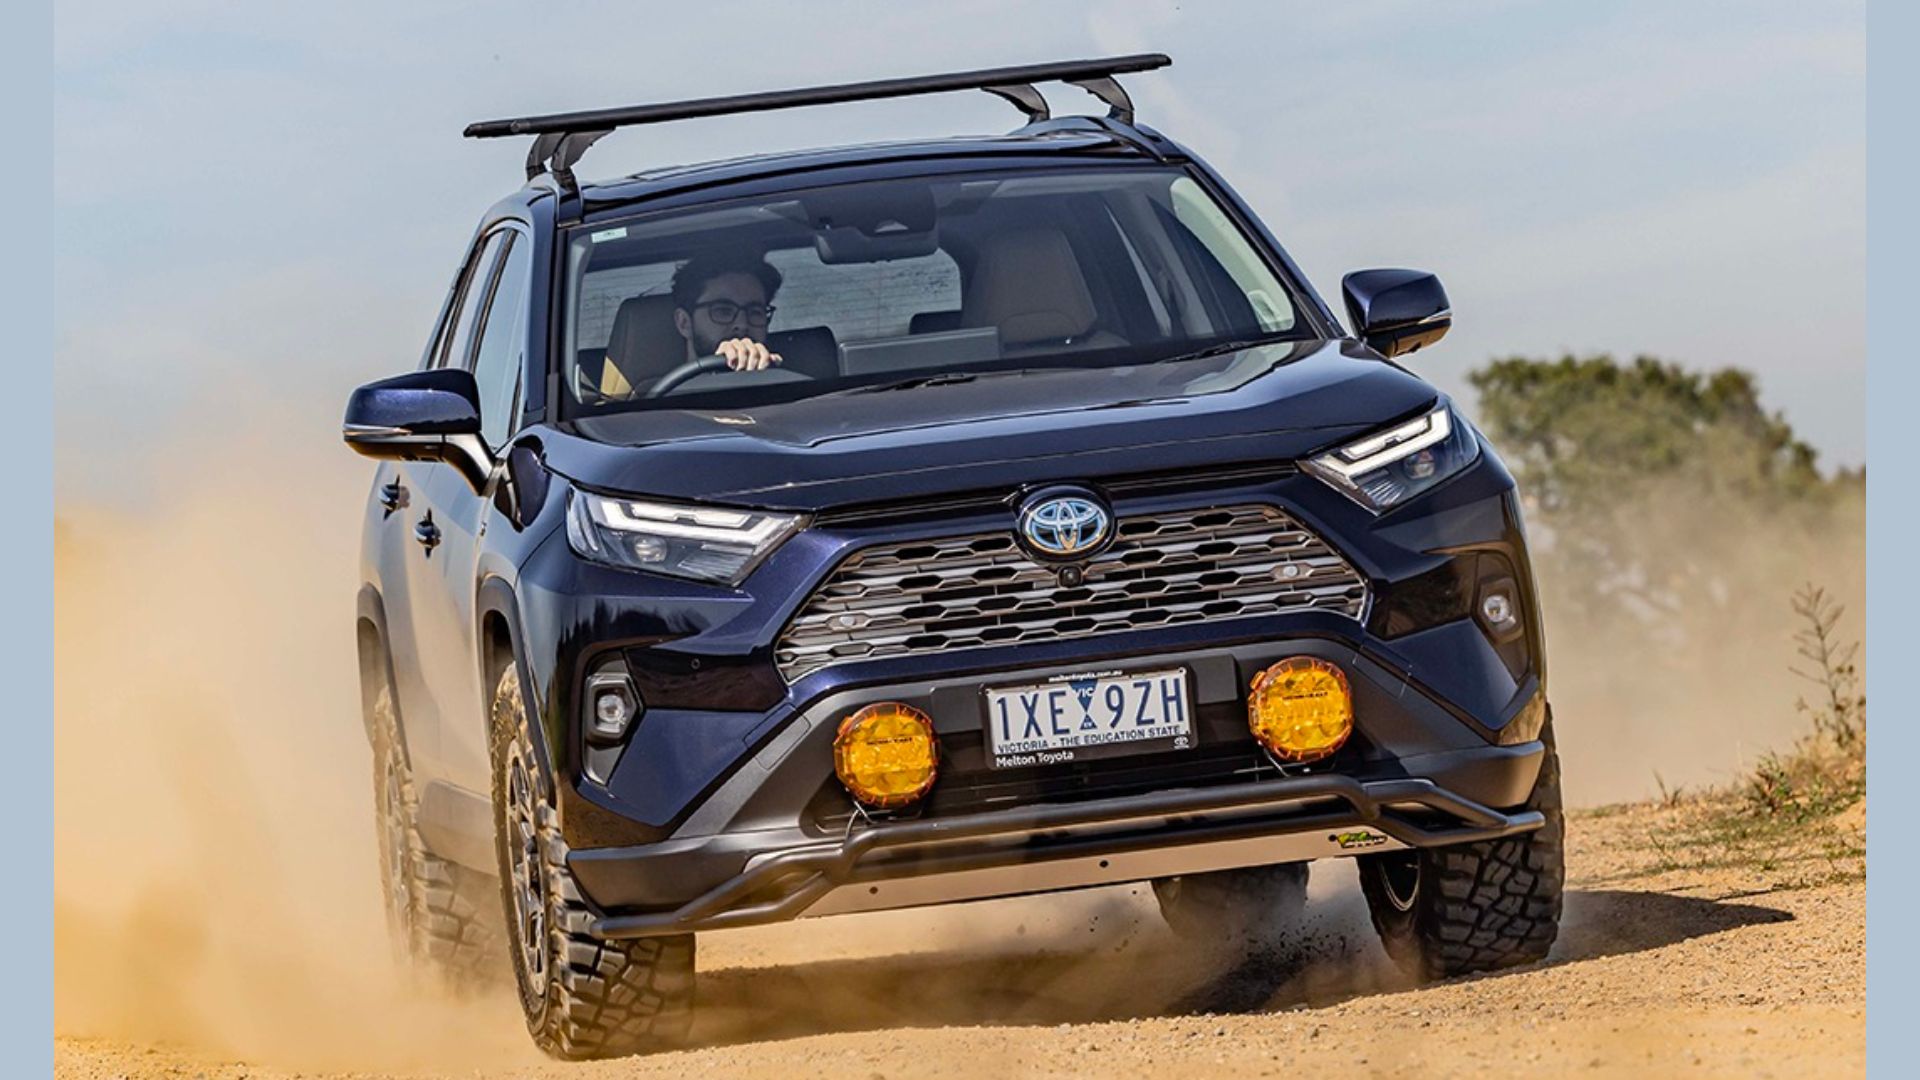 Ironman 4X4 Gives The Toyota Rav4 A Rugged, Off-Roader Look